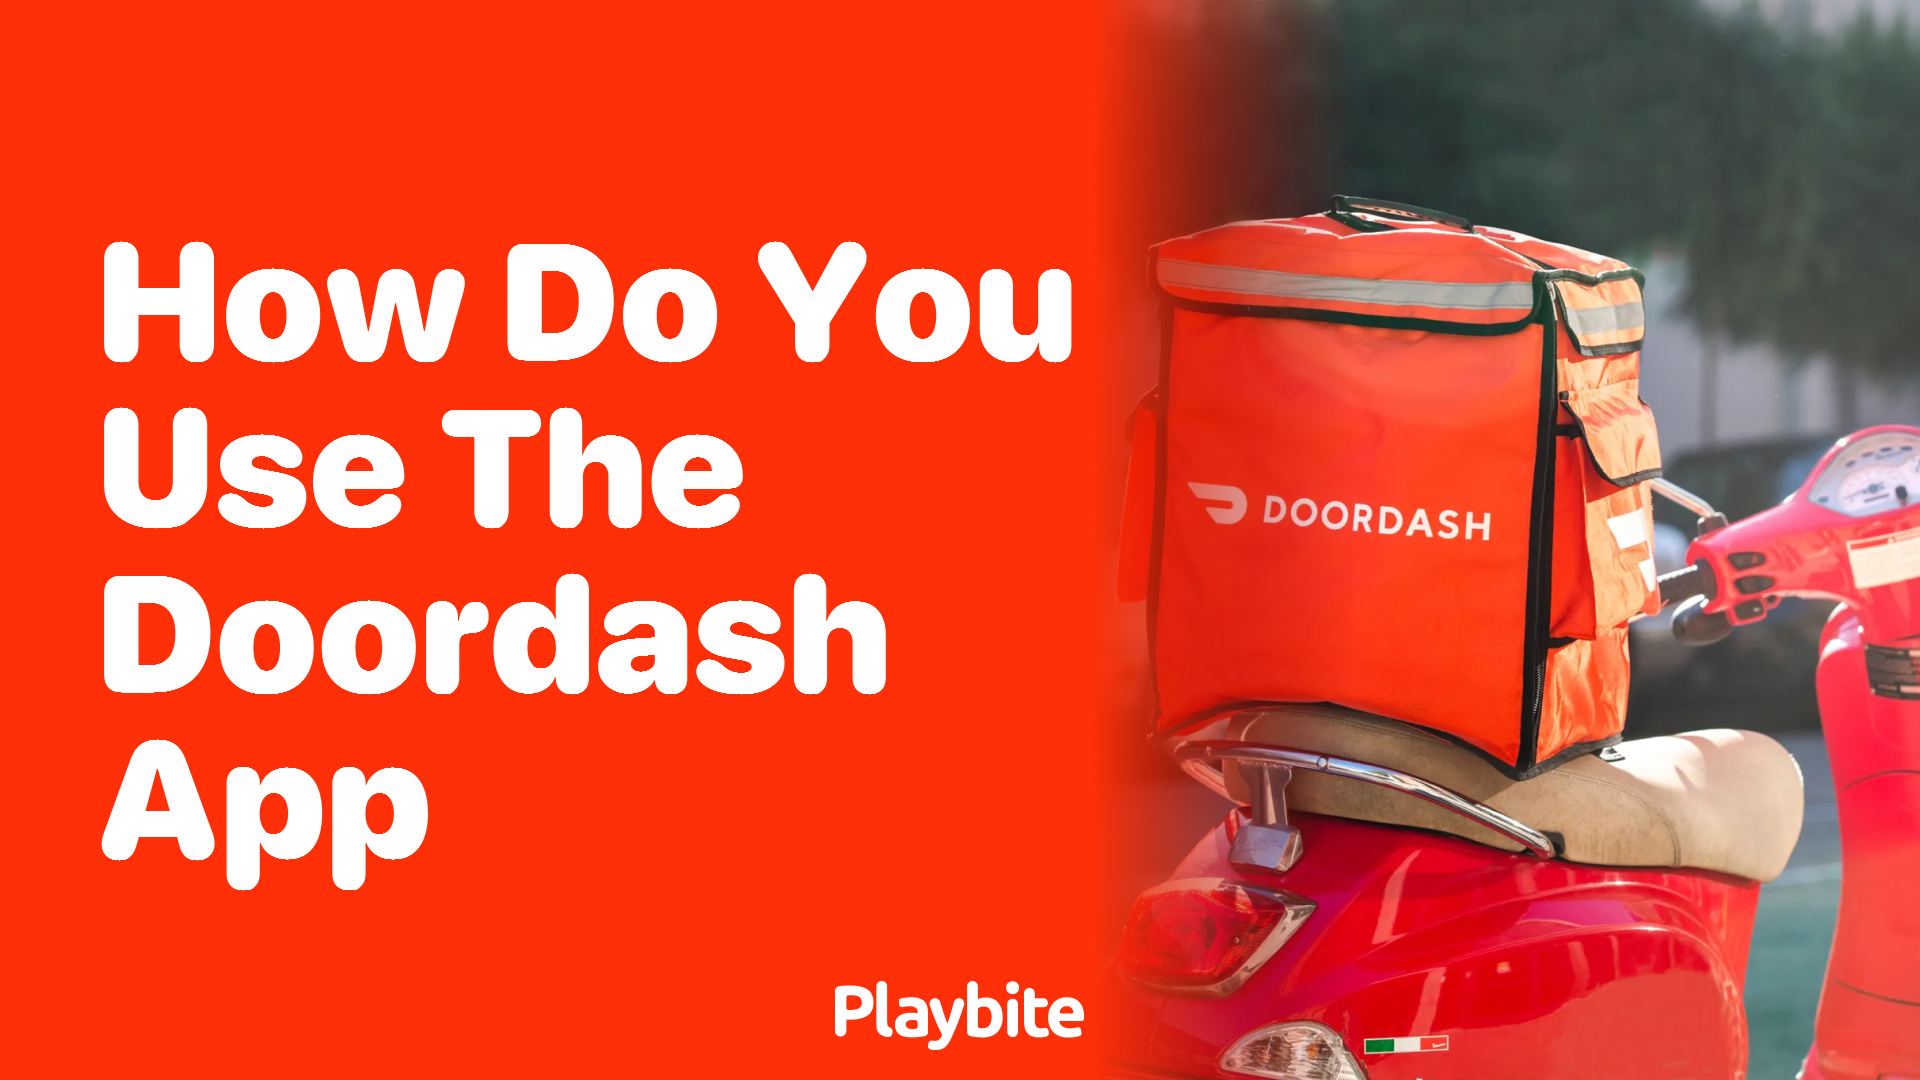 How Do You Use the DoorDash App? A Simple Guide